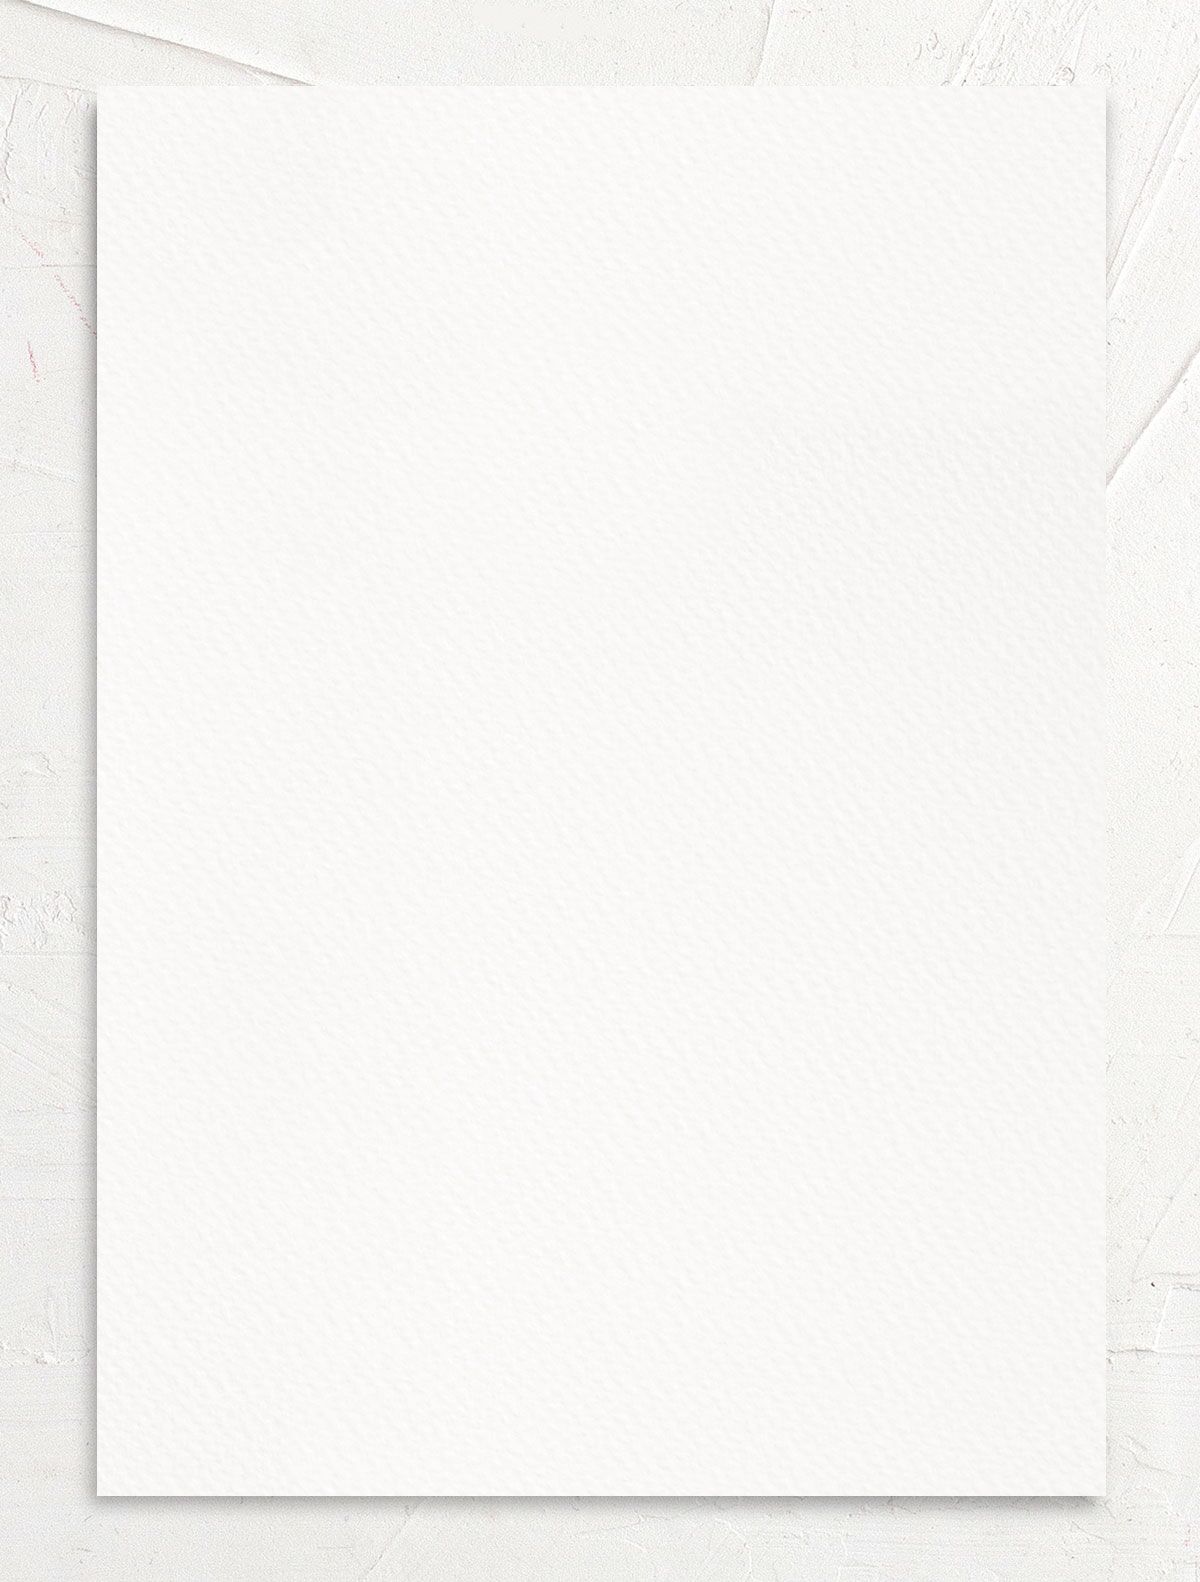 Exquisite Regency Rehearsal Dinner Invitations back in Pure White